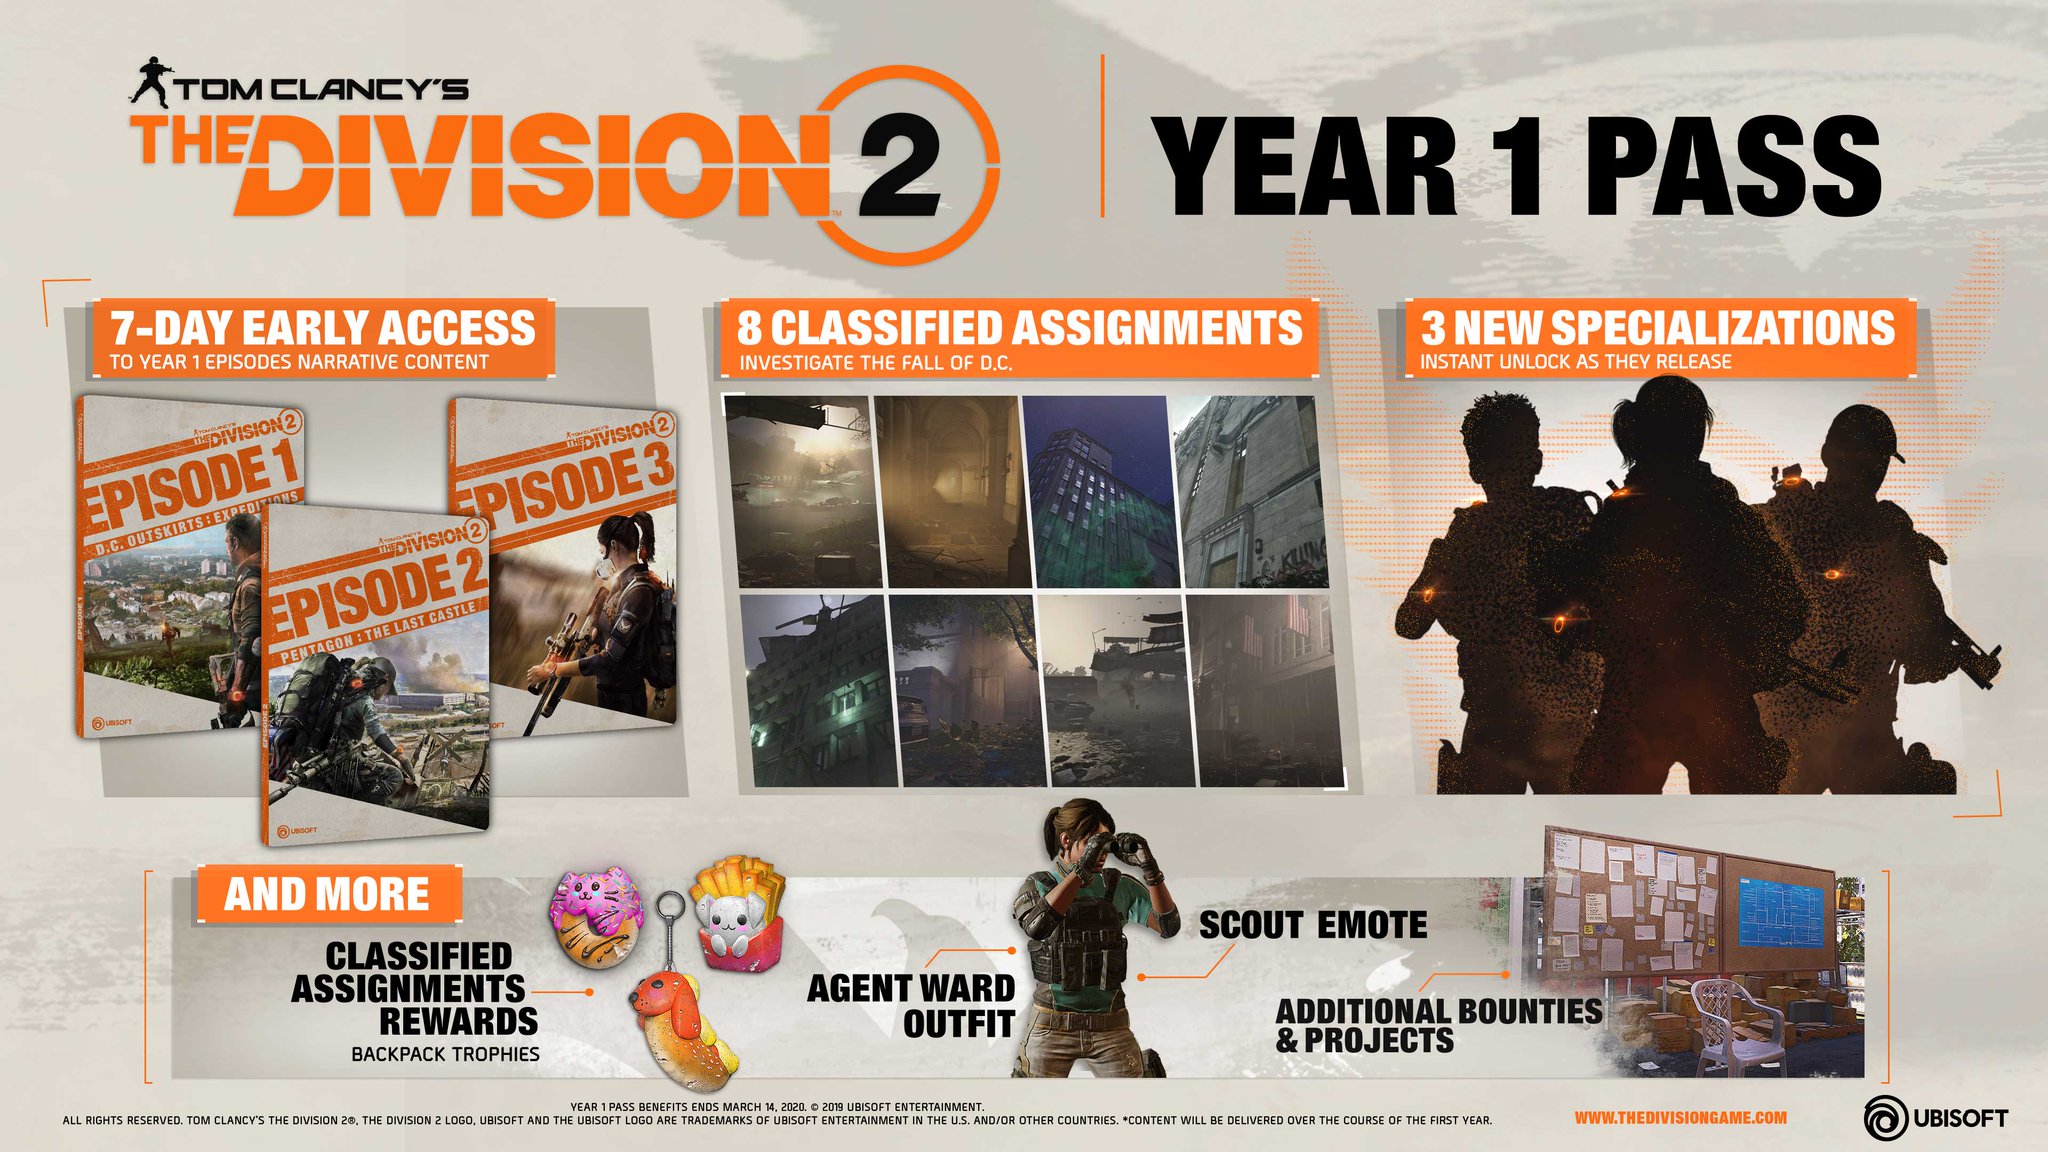 What will be in Season Pass 2?